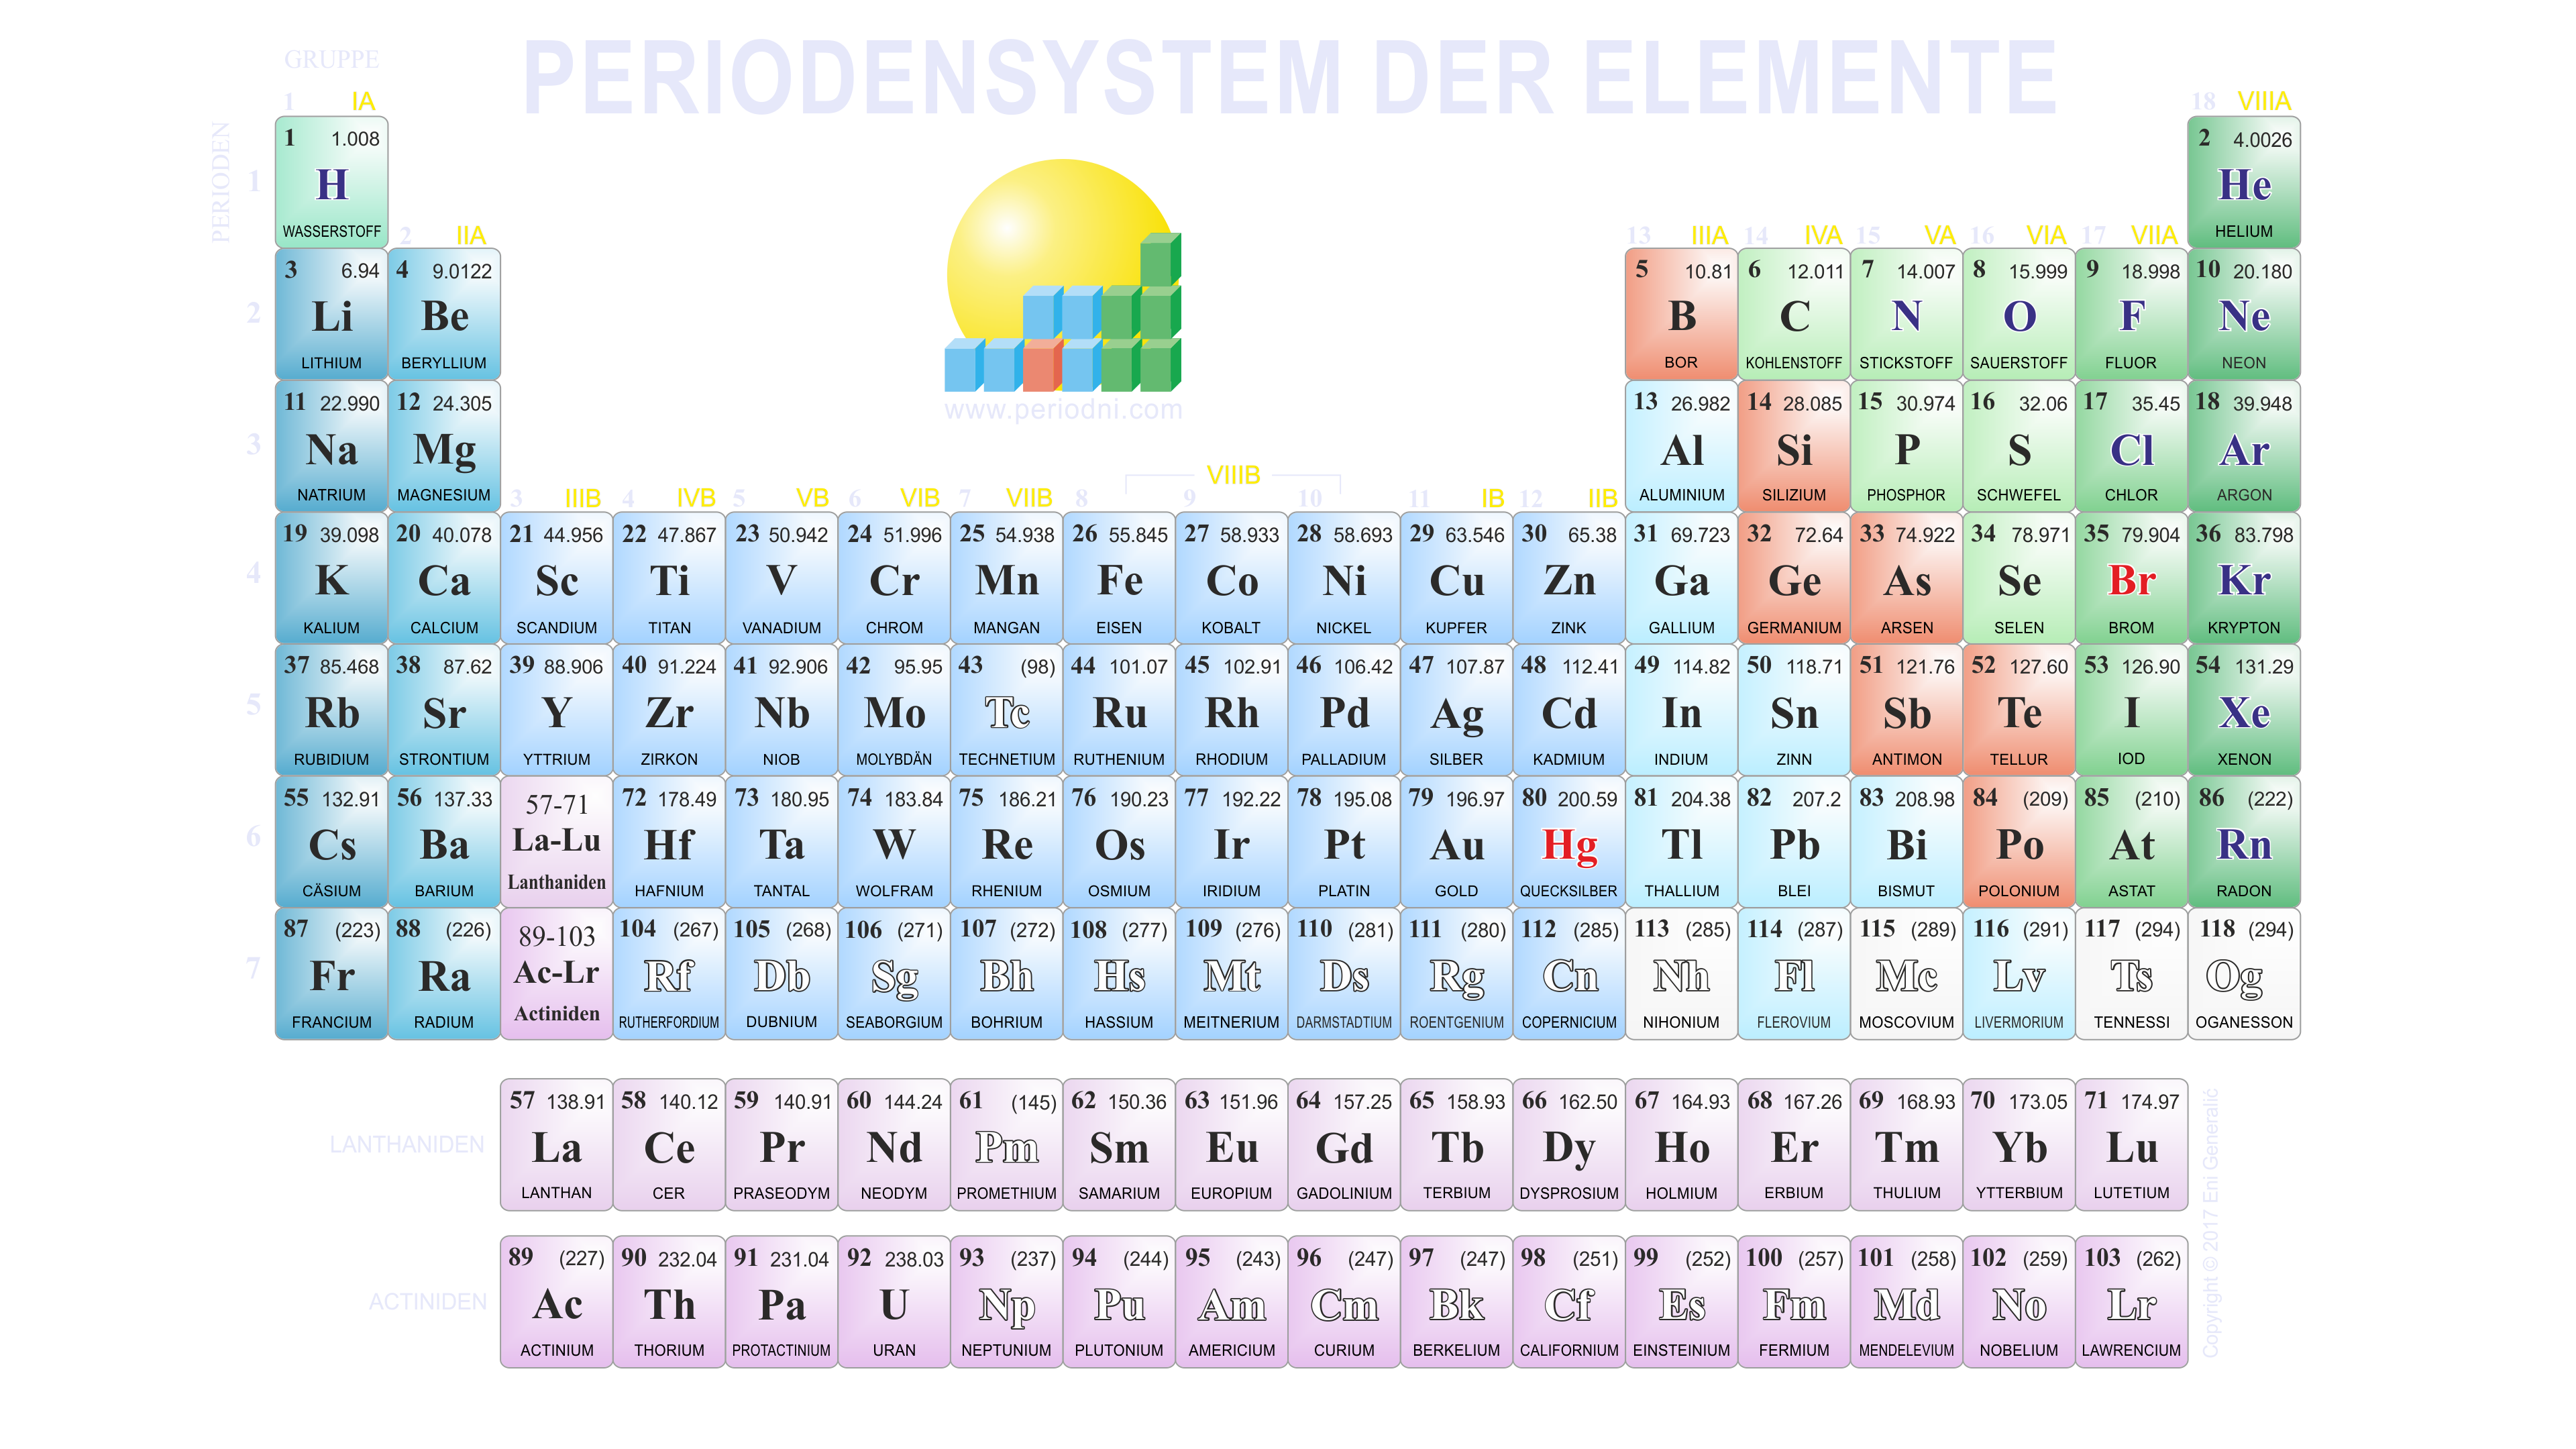 Direct download link: https://www.periodni.com/gallery/periodensystem-4k-3840x2160-dunklen_hintergrund.png